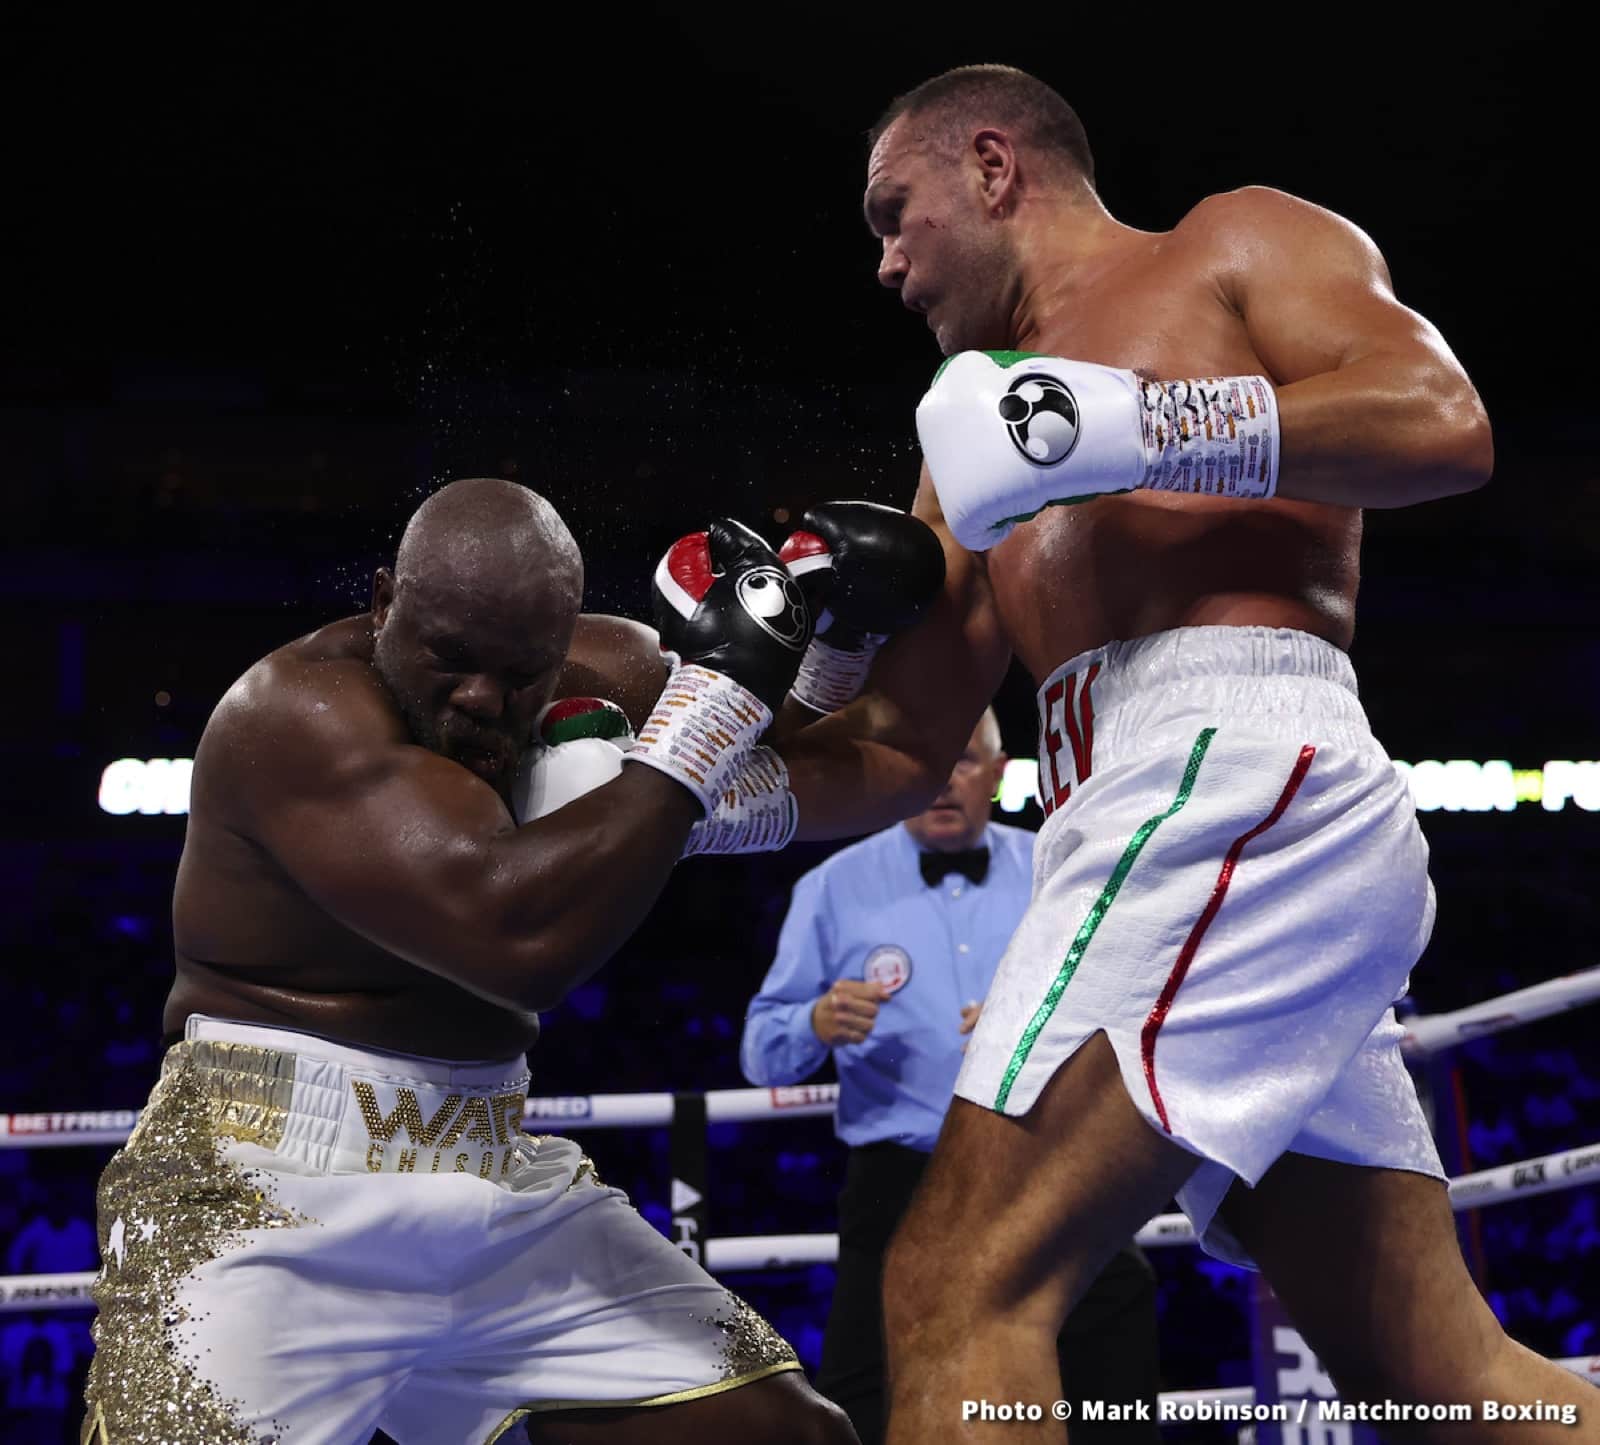 Chisora vs. Pulev 2 - LIVE action results from London